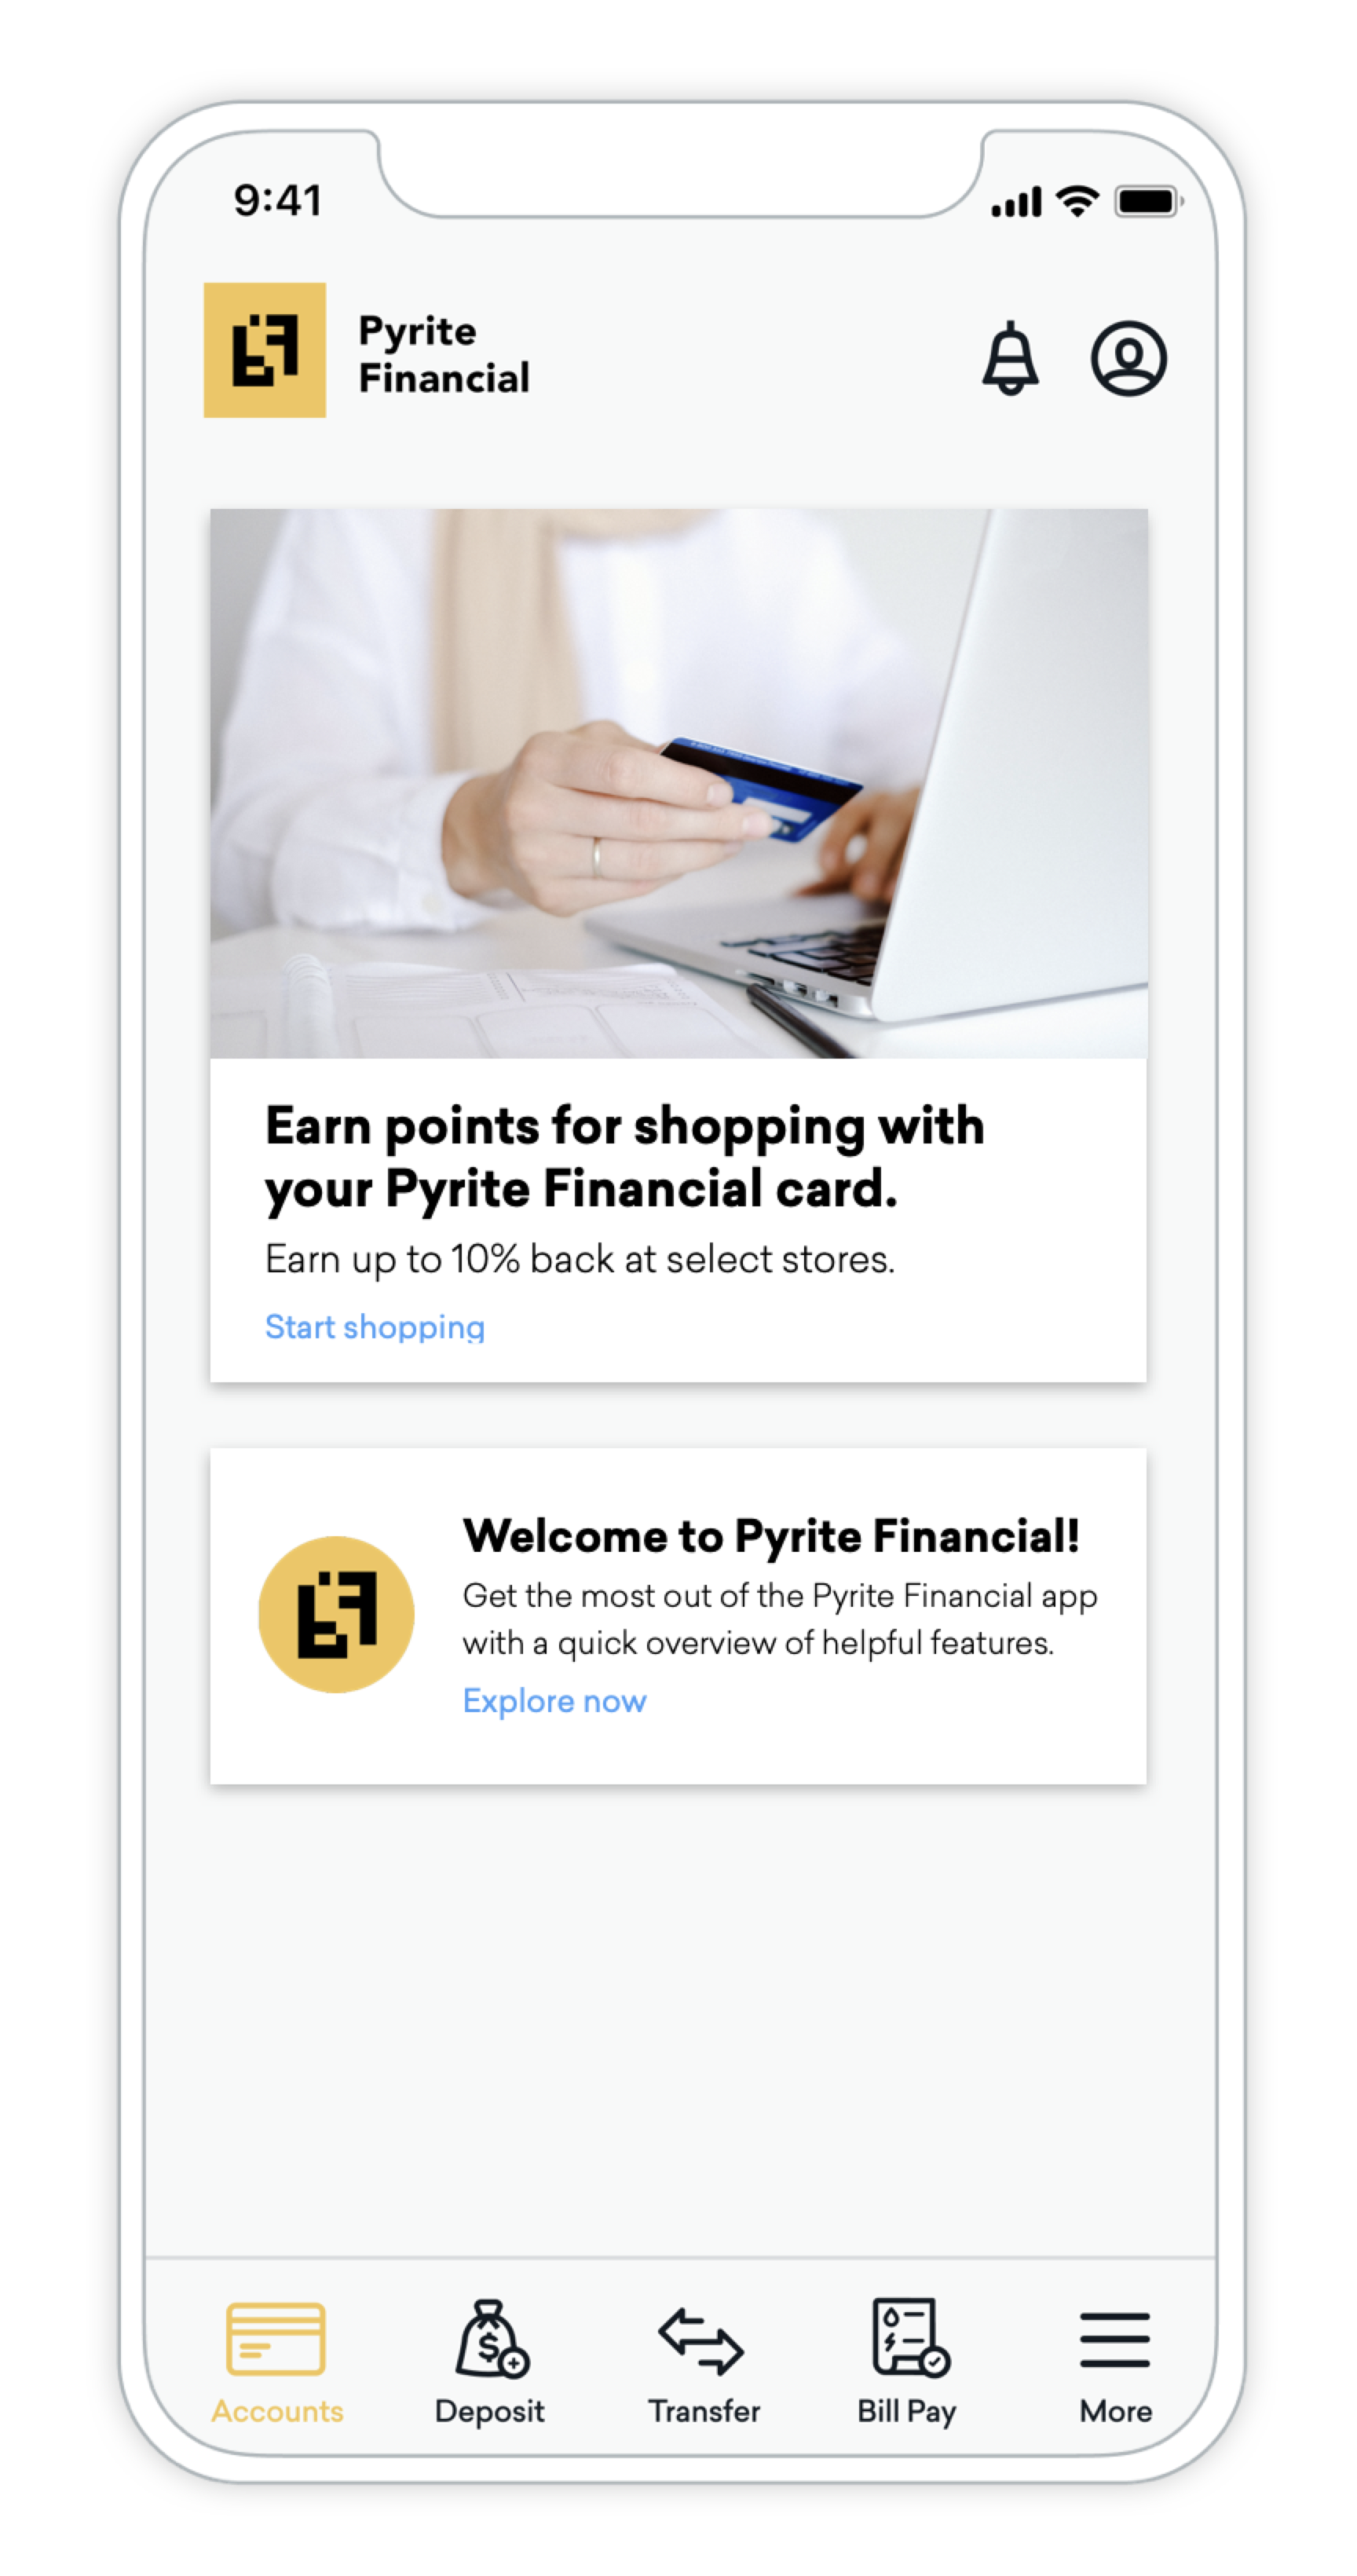 Sample finance app showing Captioned Image and Banner Content Cards